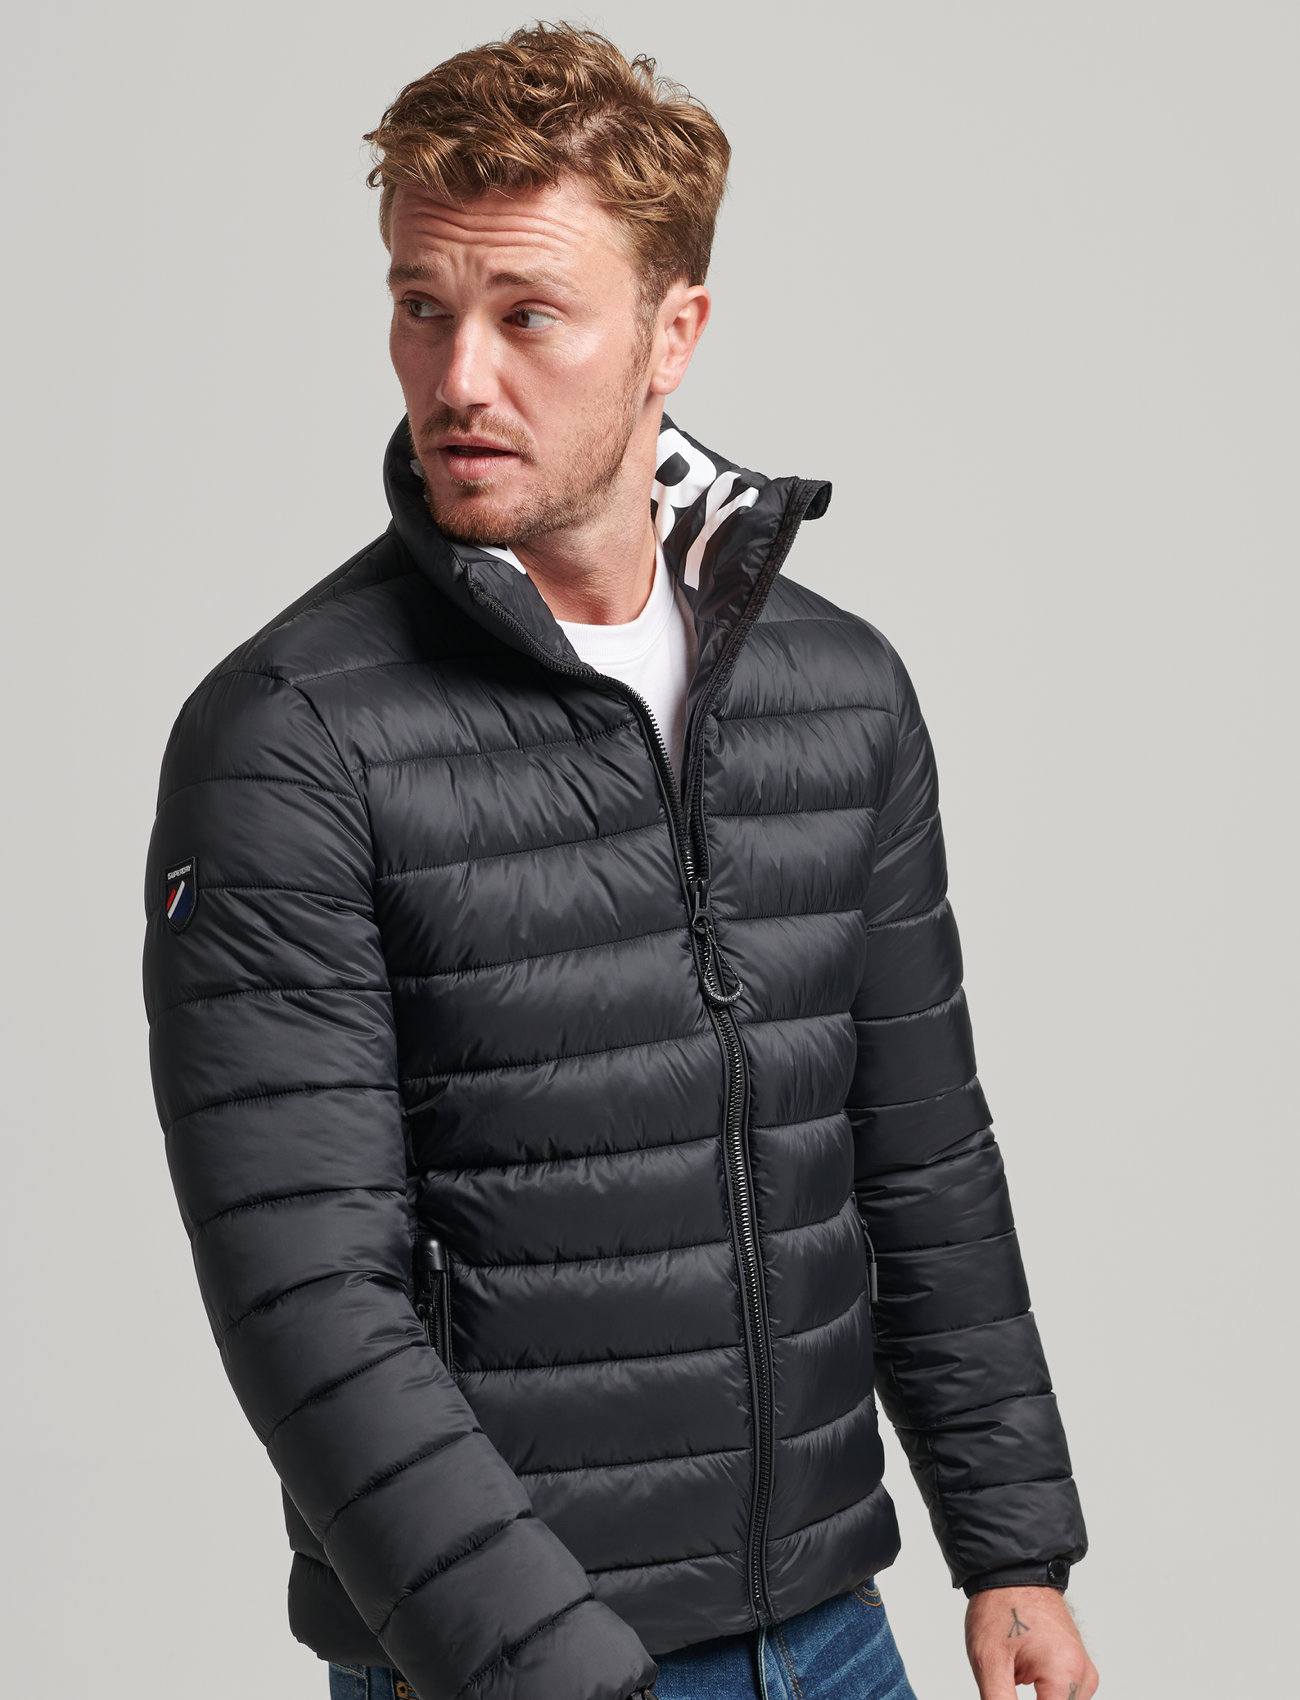 at Boozt.com. Padded Code Buy Fast from Hood delivery Jkt €. Non - Mtn Superdry 99.99 Fuji Superdry returns online jackets and easy